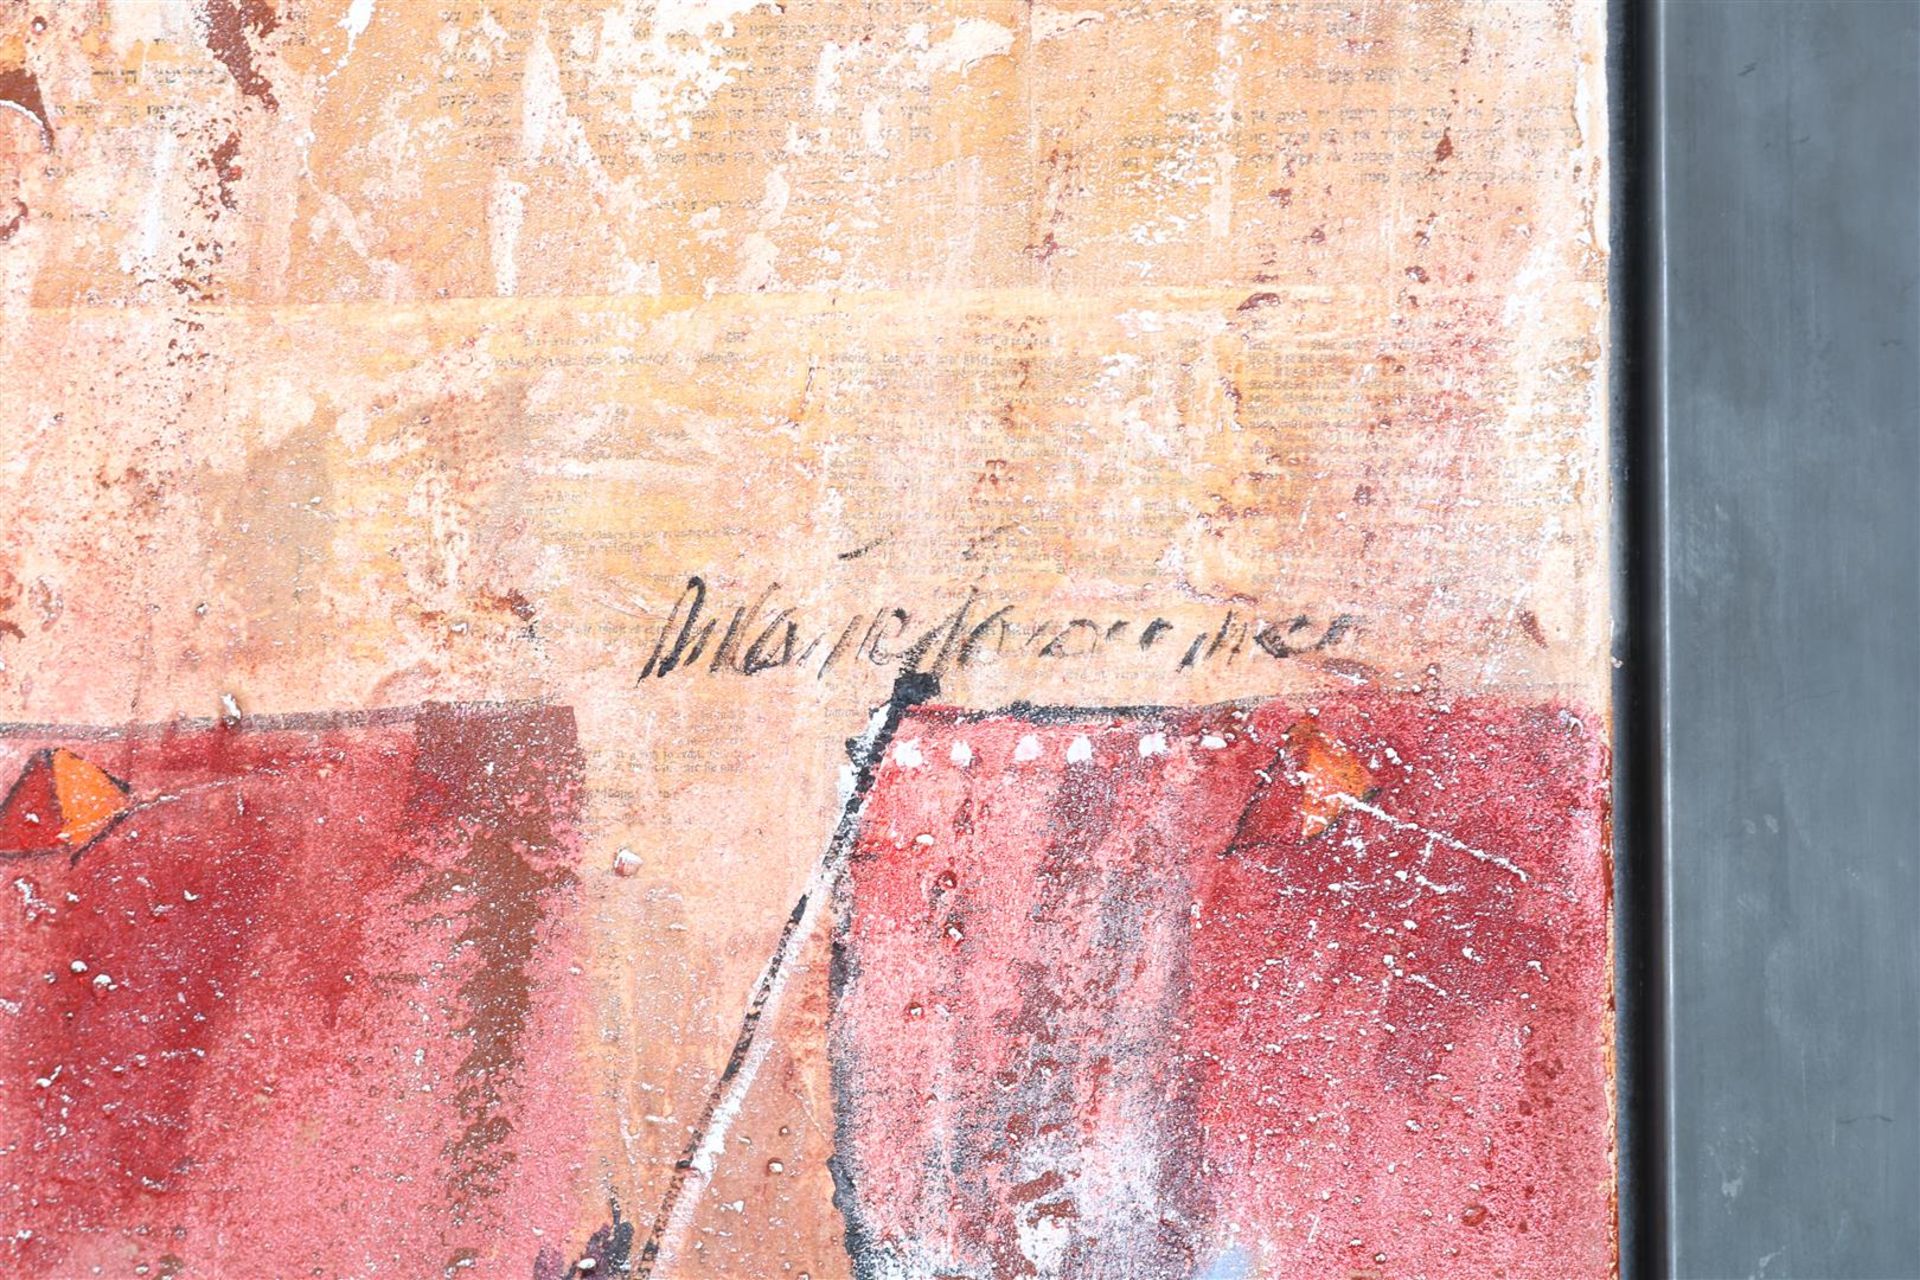 Antonio Poioumen (1946-) 'From Egypt', signed top right, mixed media on canvas 220 x 220 cm. - Image 3 of 4